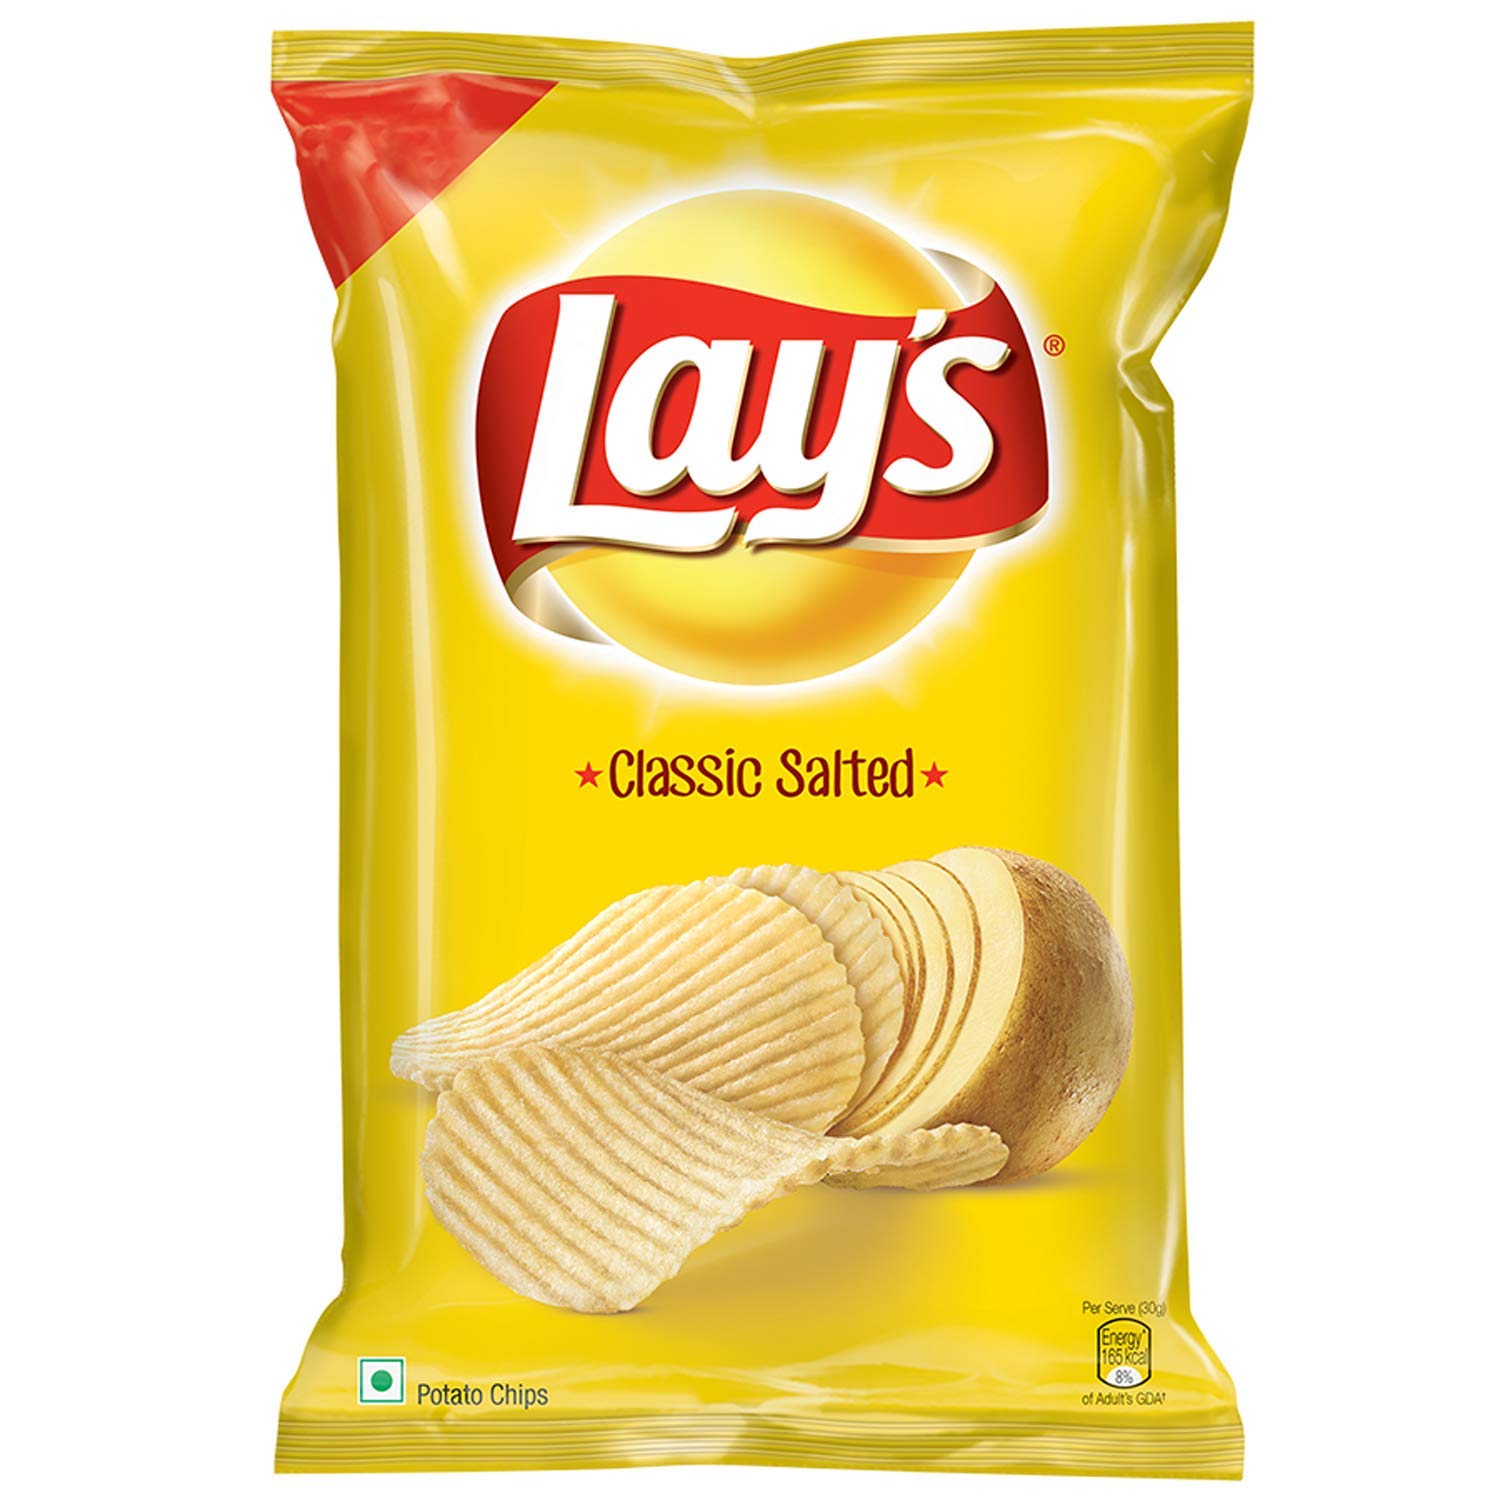 Lays's classic salted